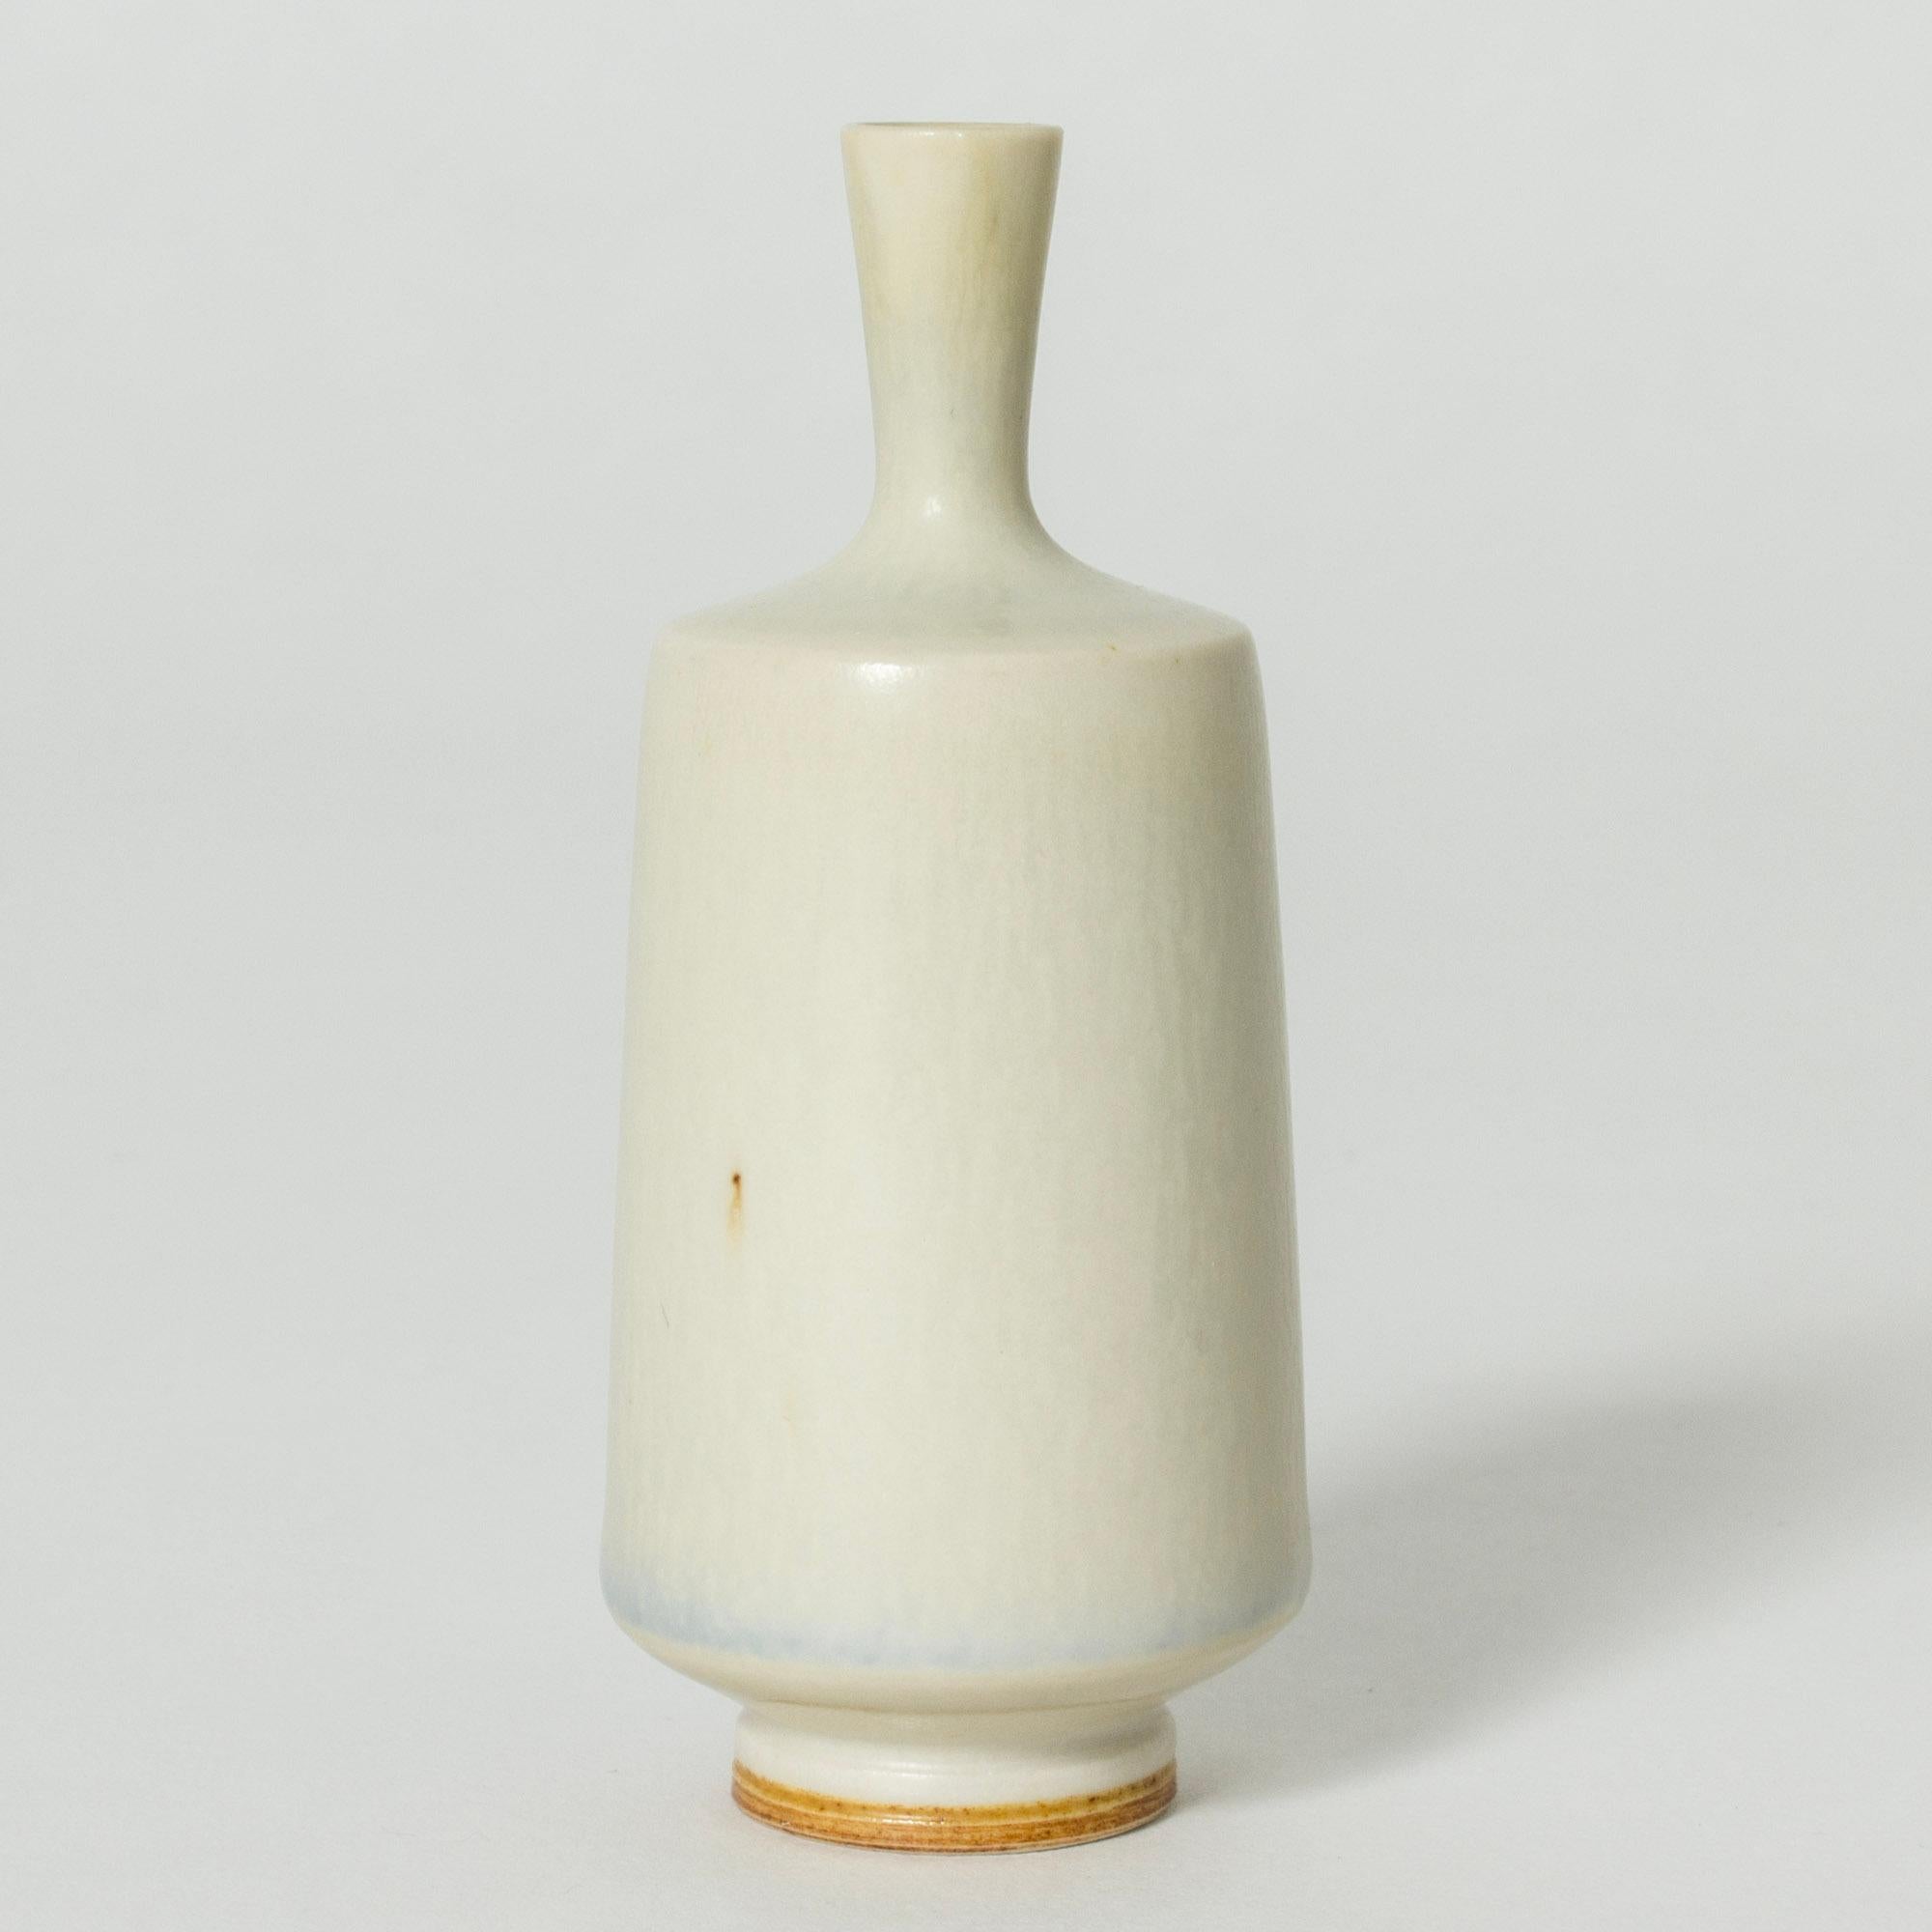 Minature stoneware vase by Berndt Friberg, in a clean cylinder form, with white hare’s fur glaze. White vases by Friberg are particularly rare and sought after.

Berndt Friberg was a Swedish ceramicist, renowned for his stoneware vases and vessels